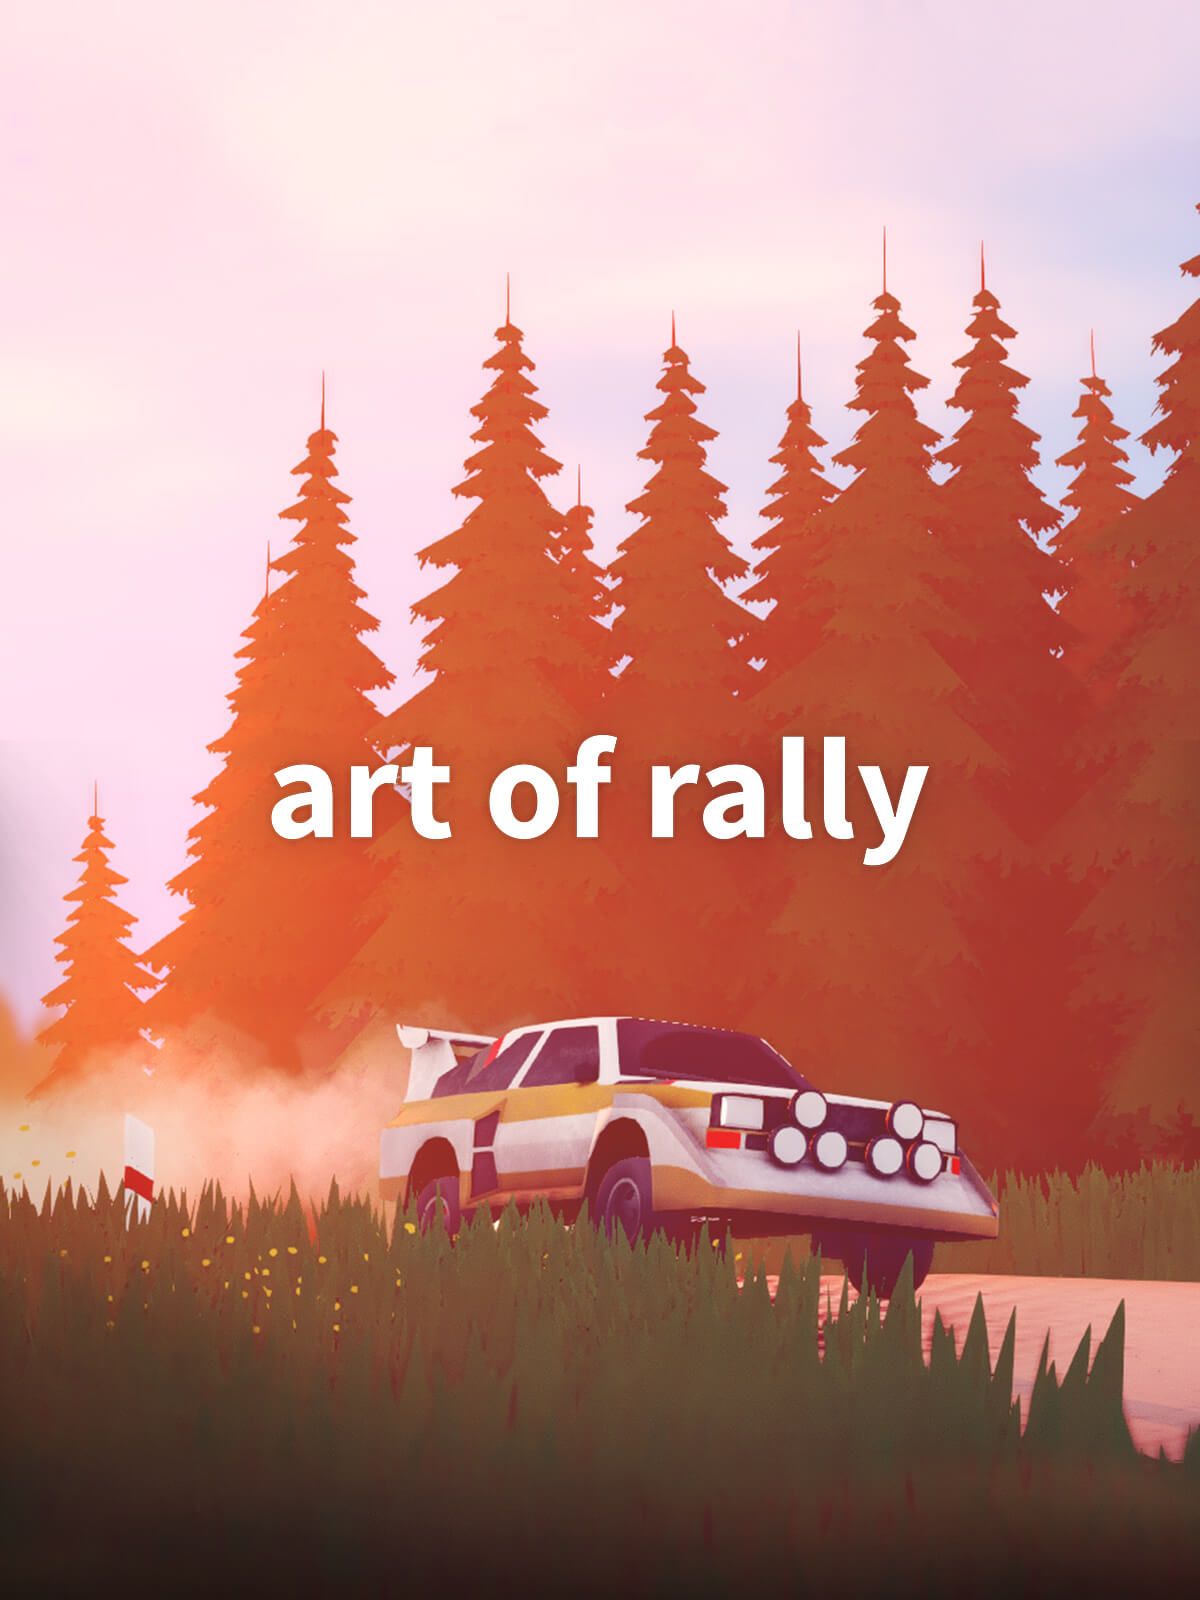 art of rally sign in